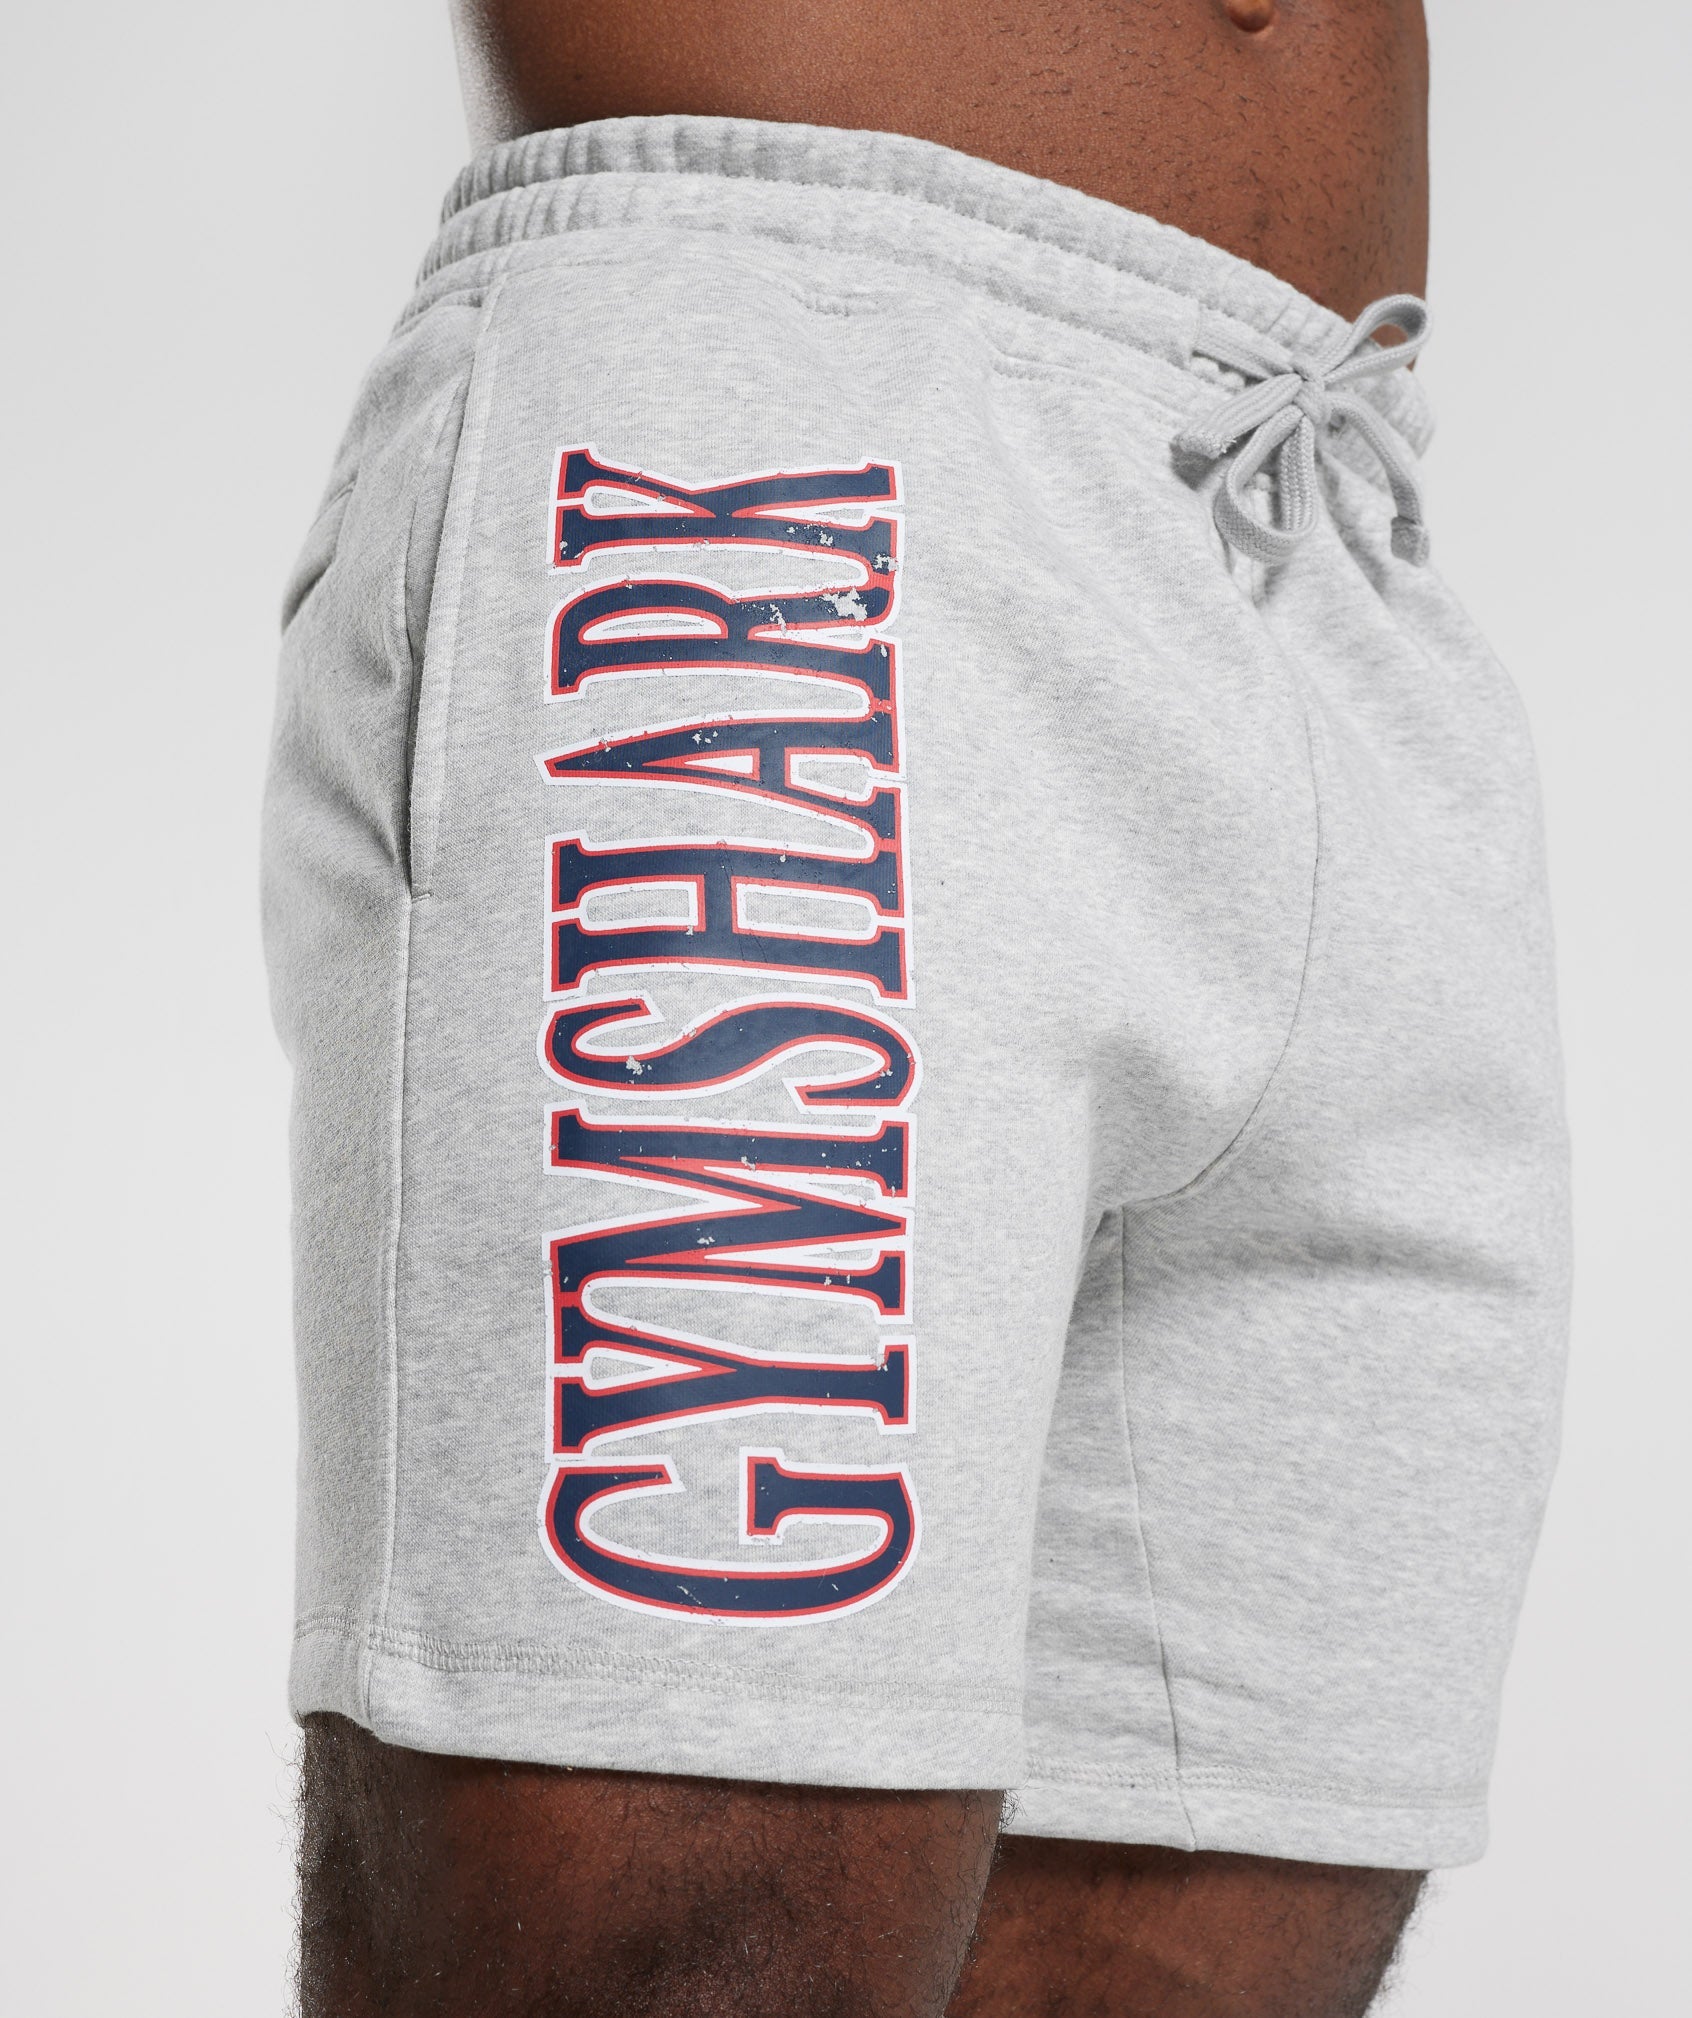 Retrowave Shorts in Light Grey Core Marl - view 5